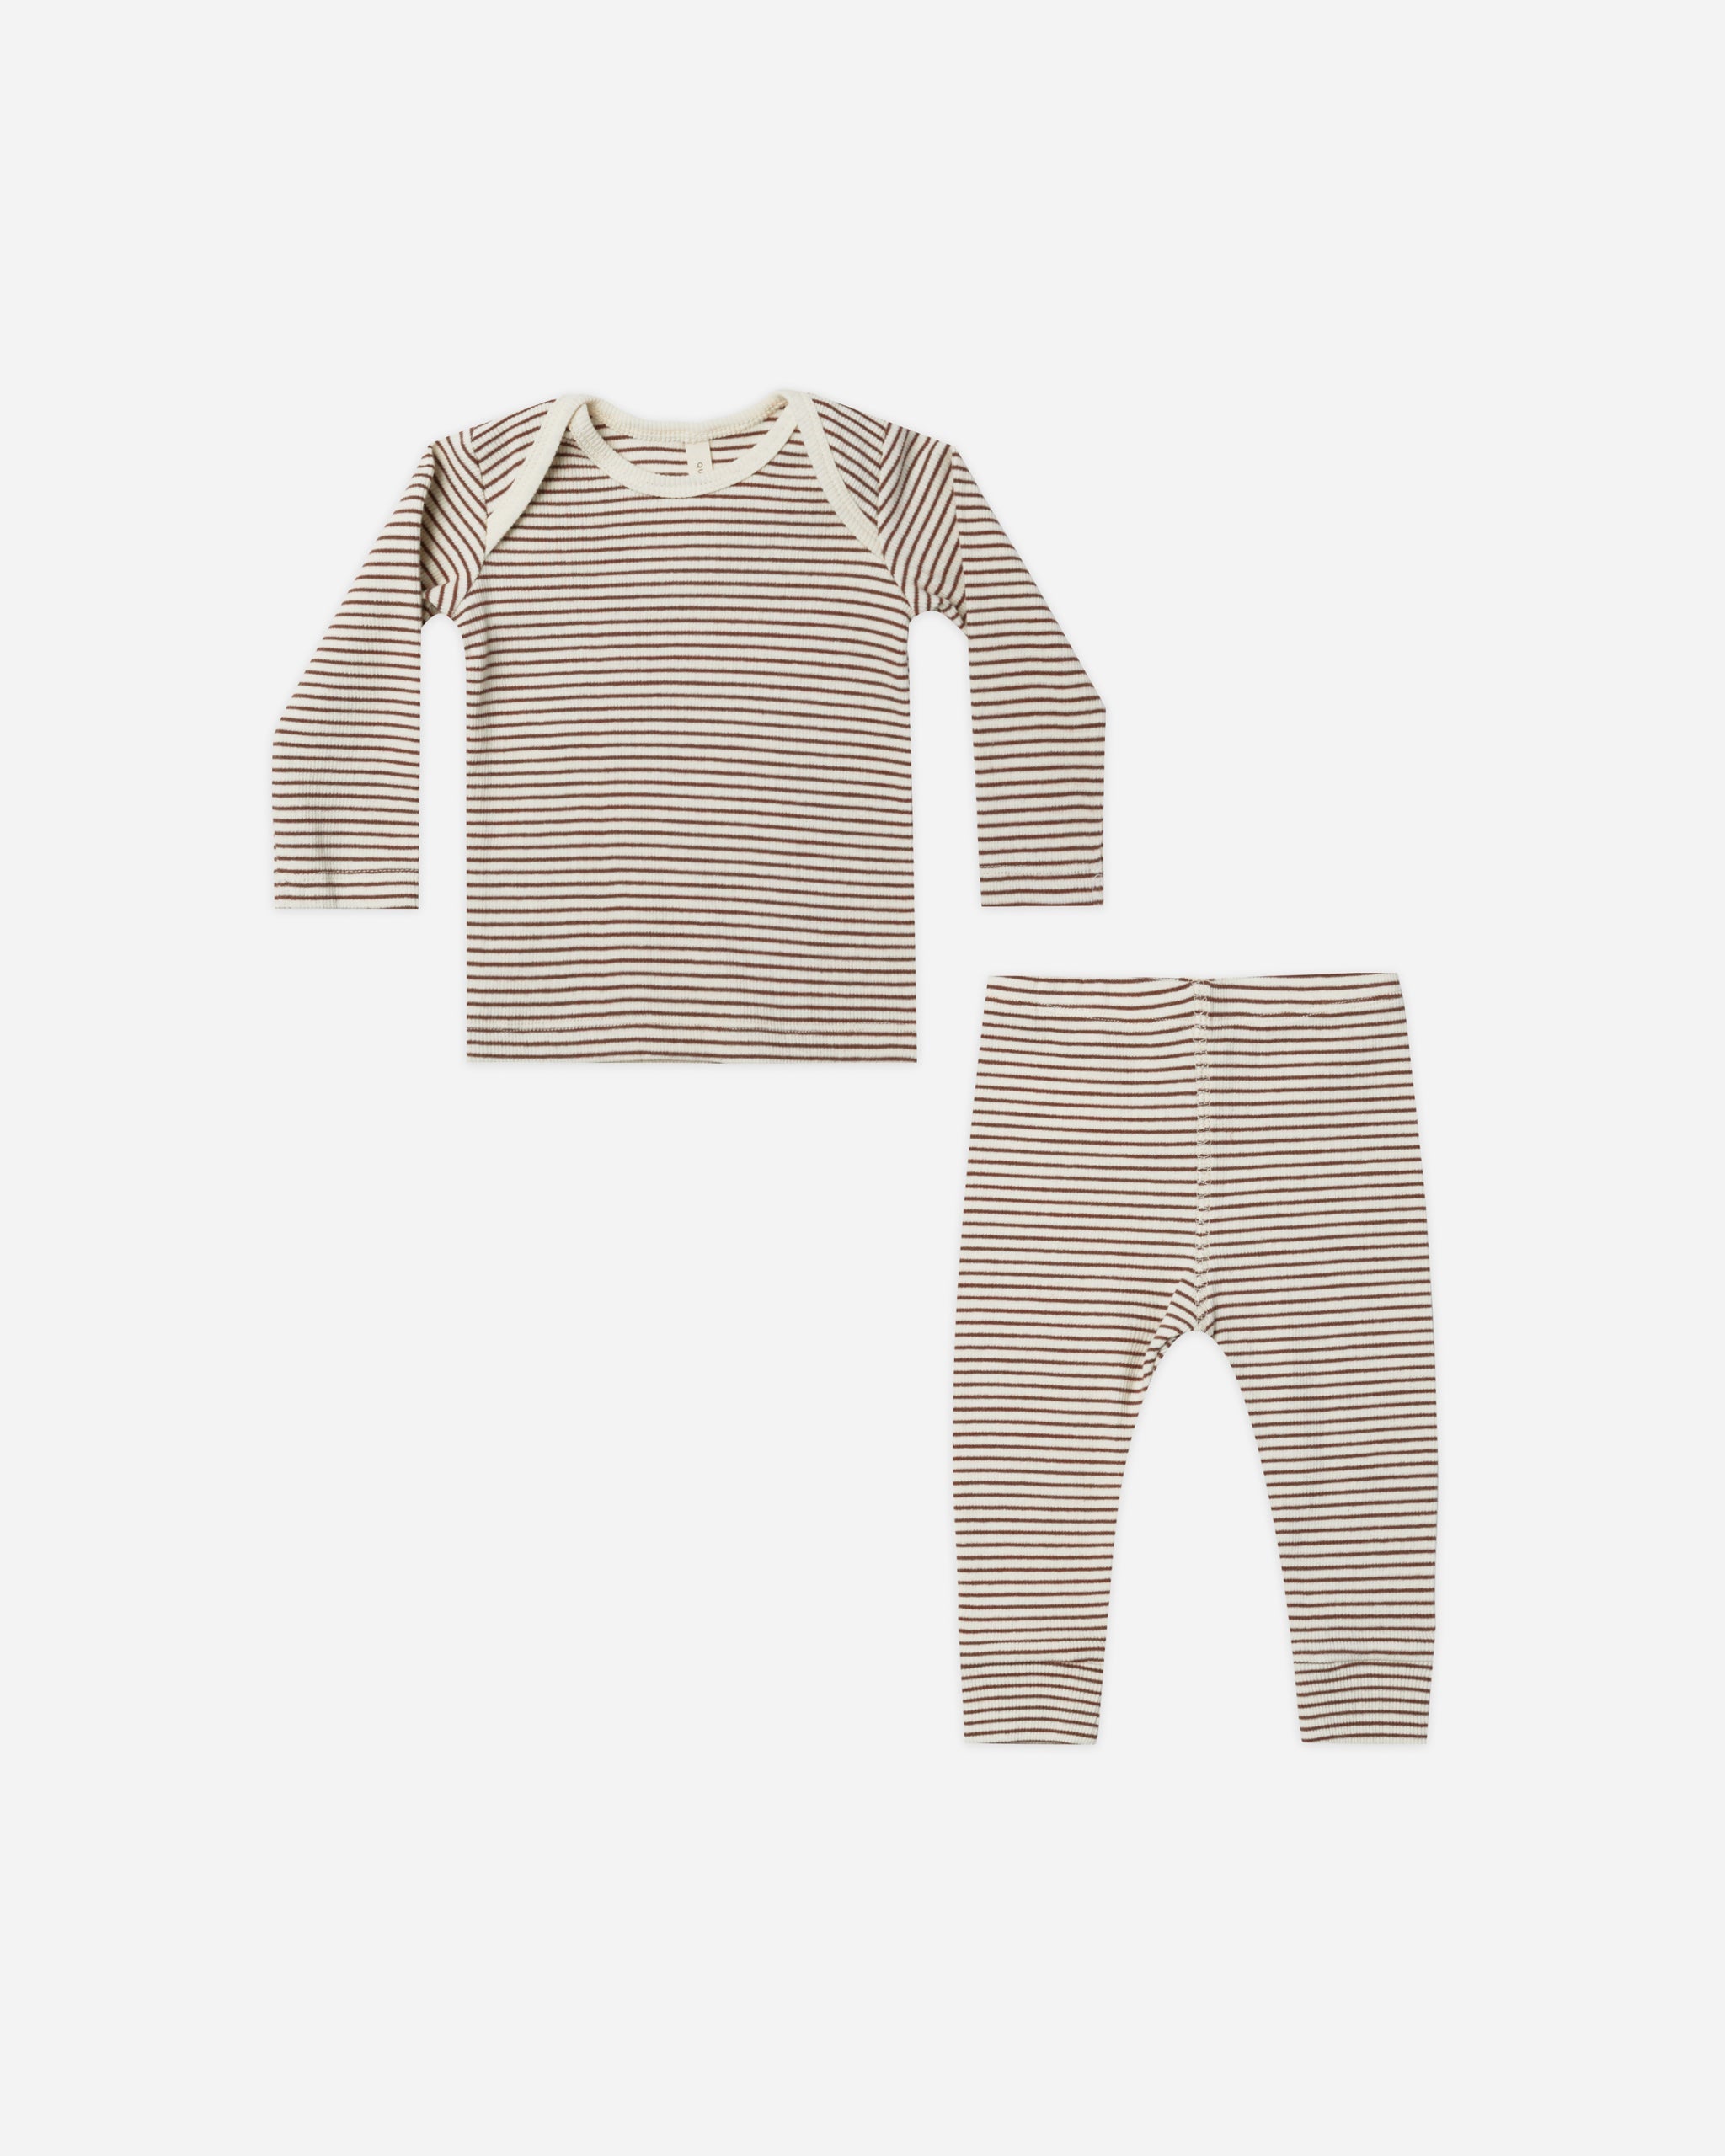 Ribbed Tee And Legging Set || Plum Stripe - Rylee + Cru | Kids Clothes | Trendy Baby Clothes | Modern Infant Outfits |